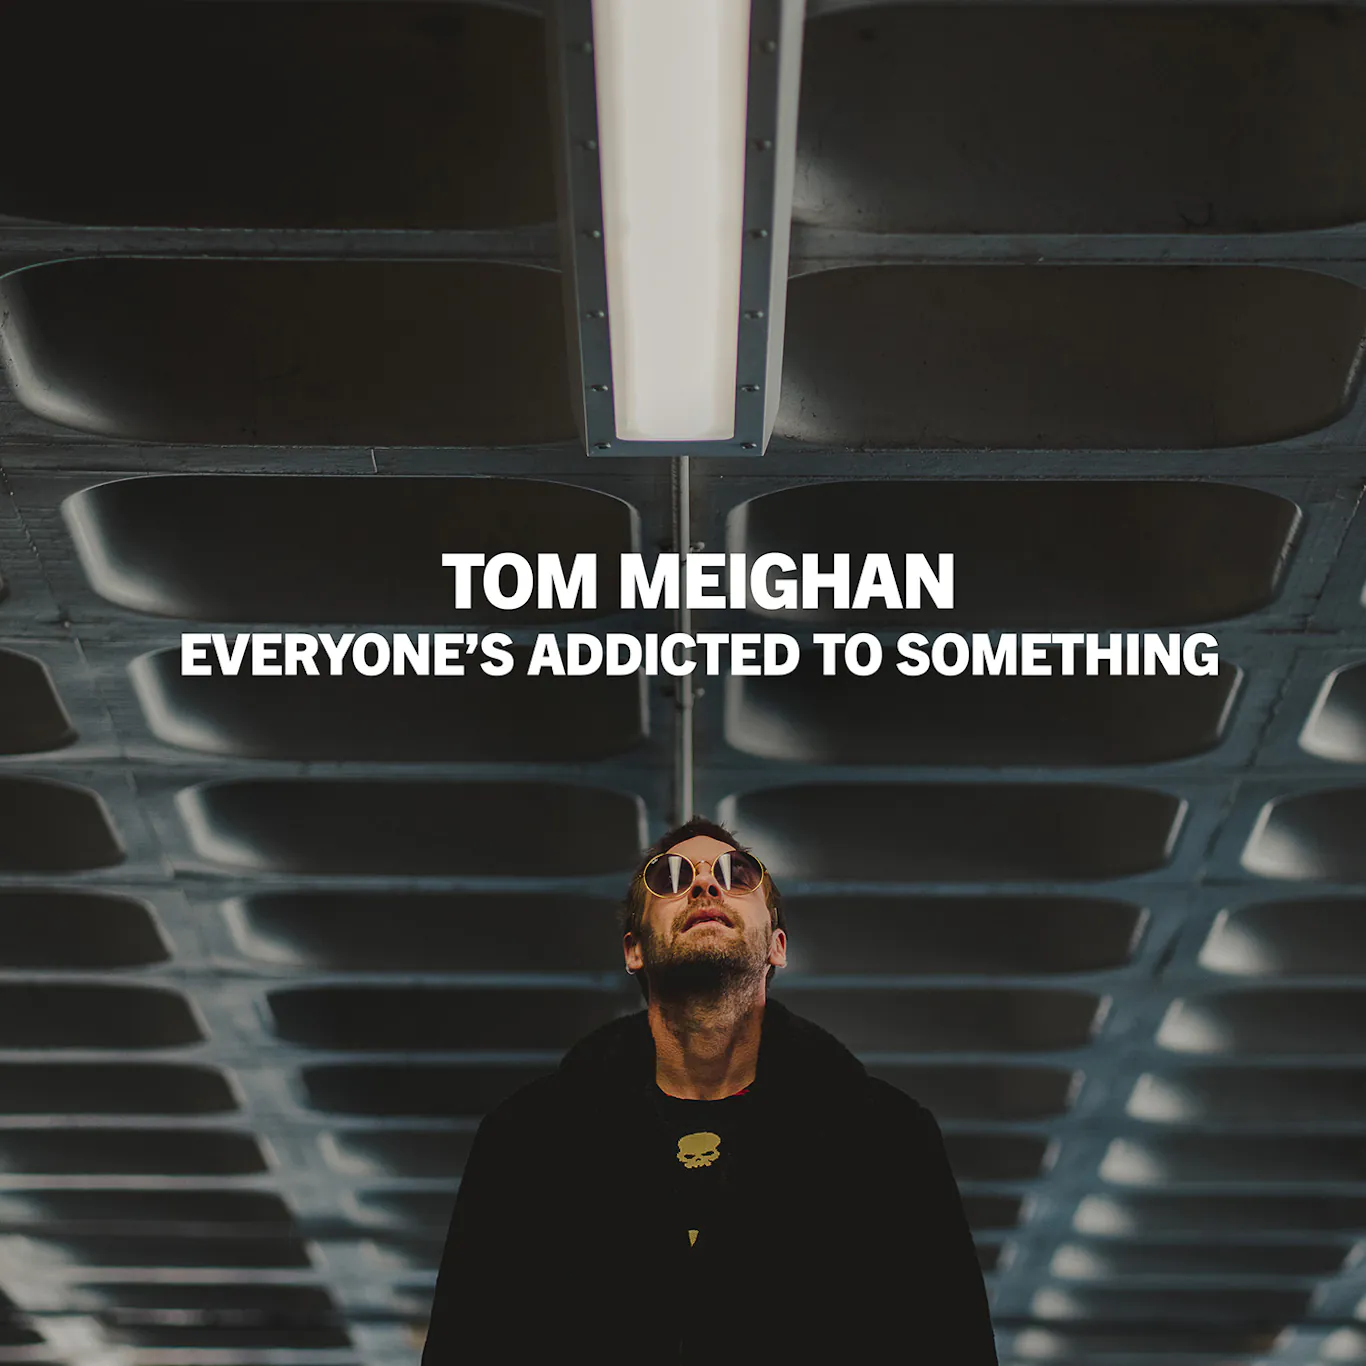 TOM MEIGHAN shares new single ‘Everyone’s Addicted To Something’ ahead of UK tour and album